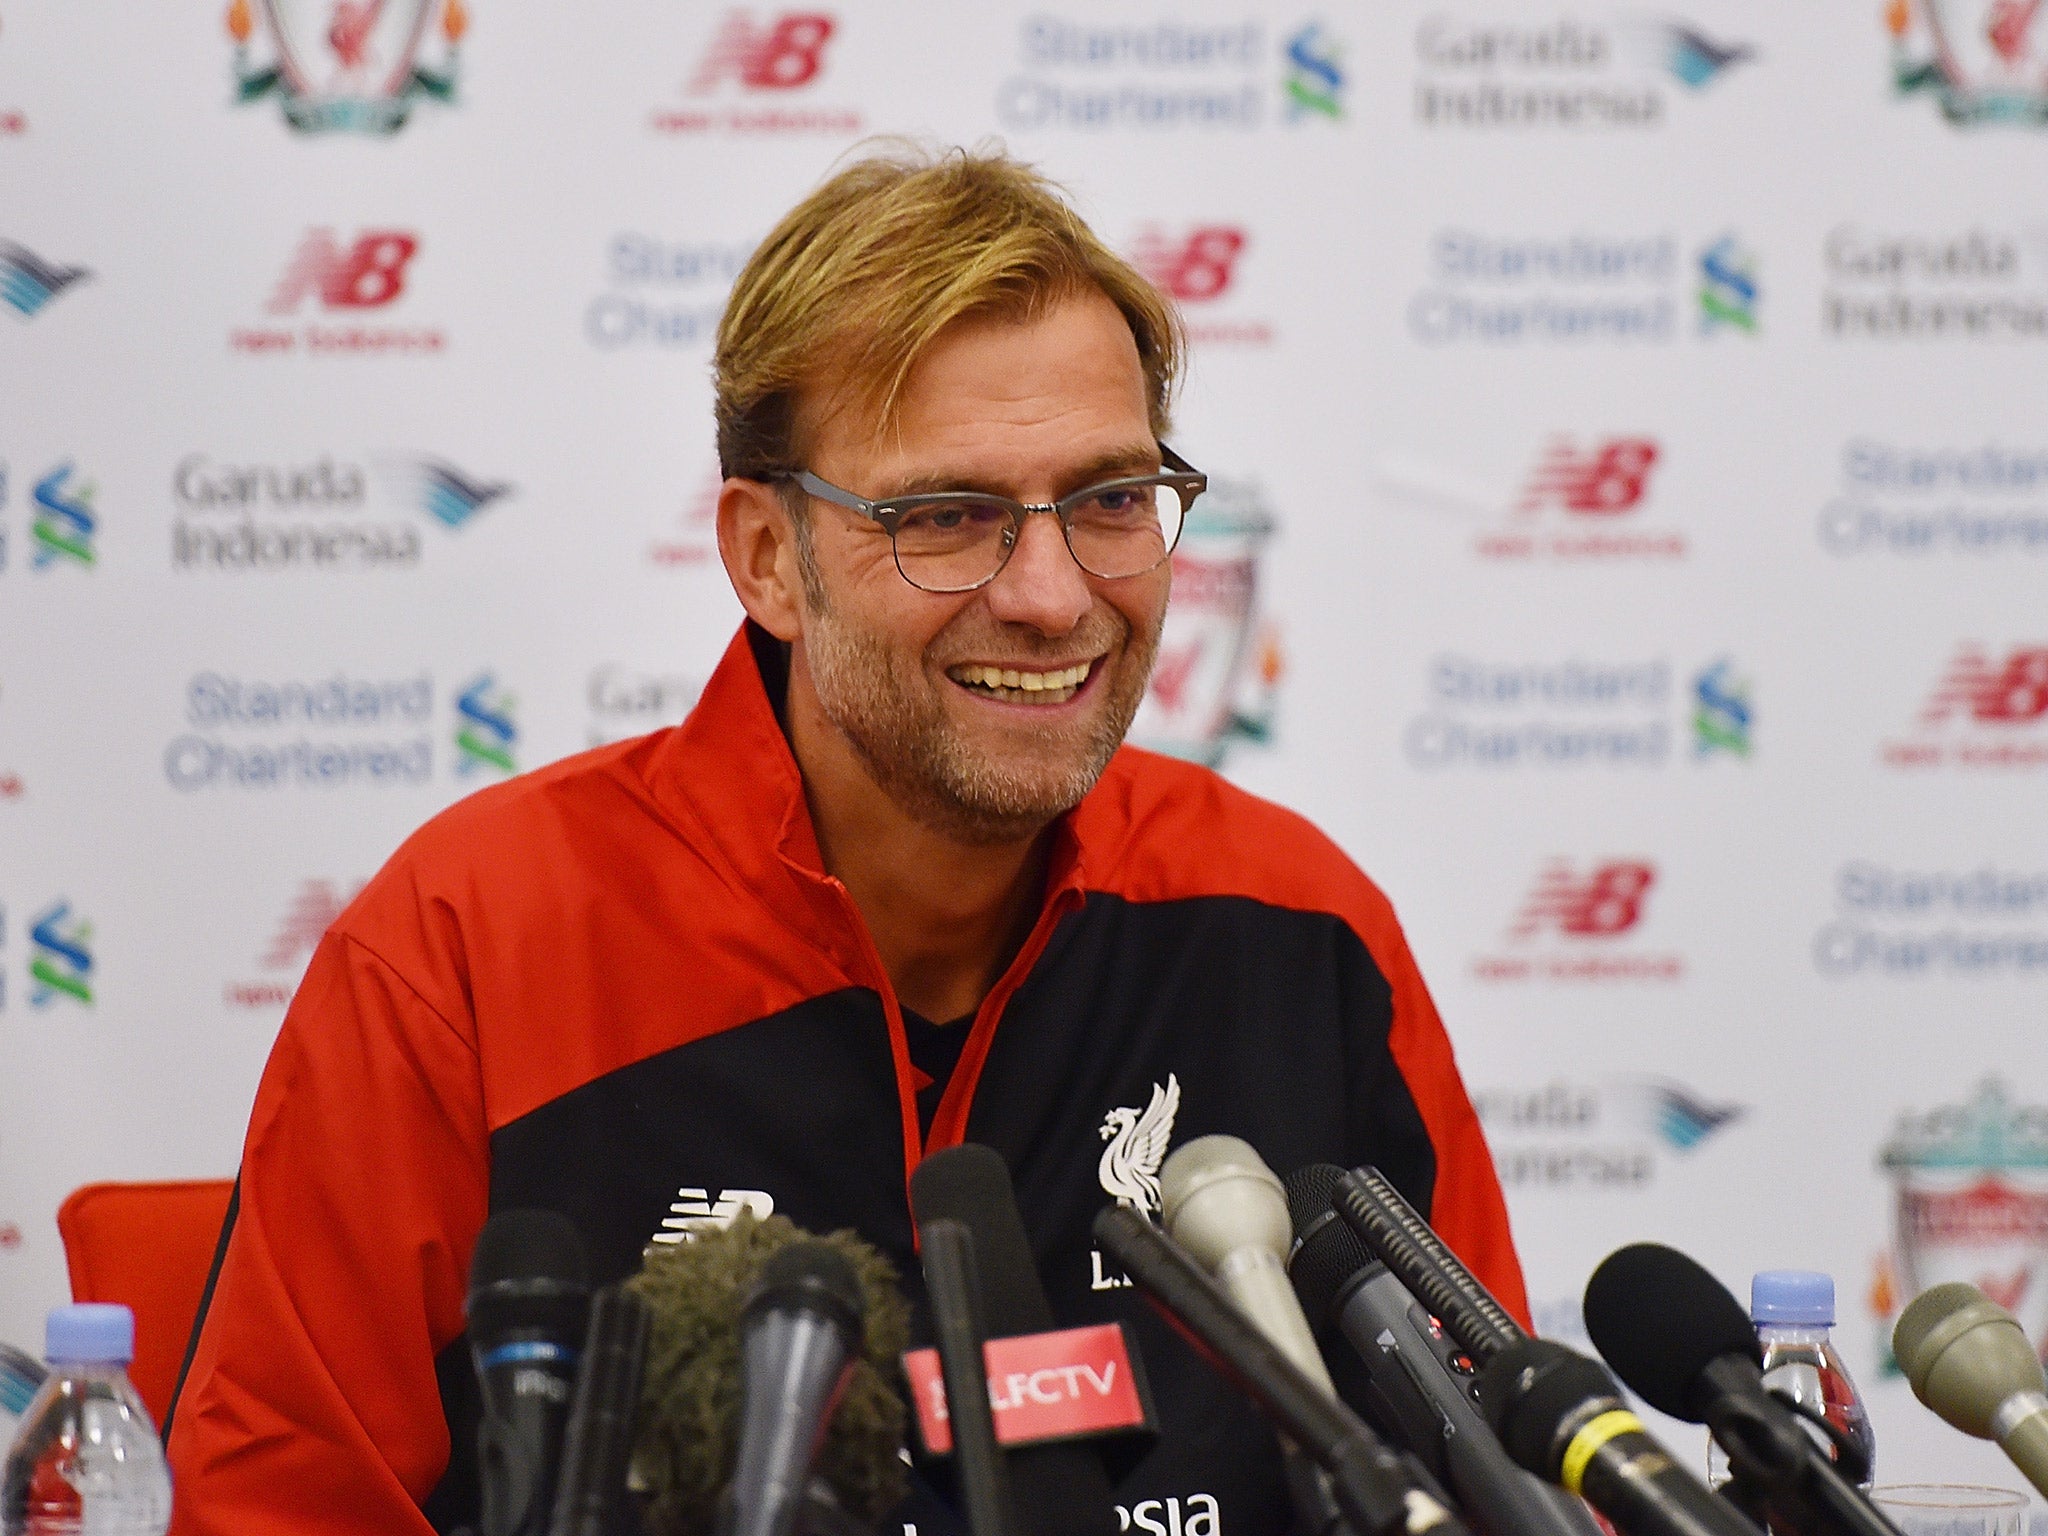 Jurgen Klopp, the new manager of Liverpool, in his first pre-match press conference